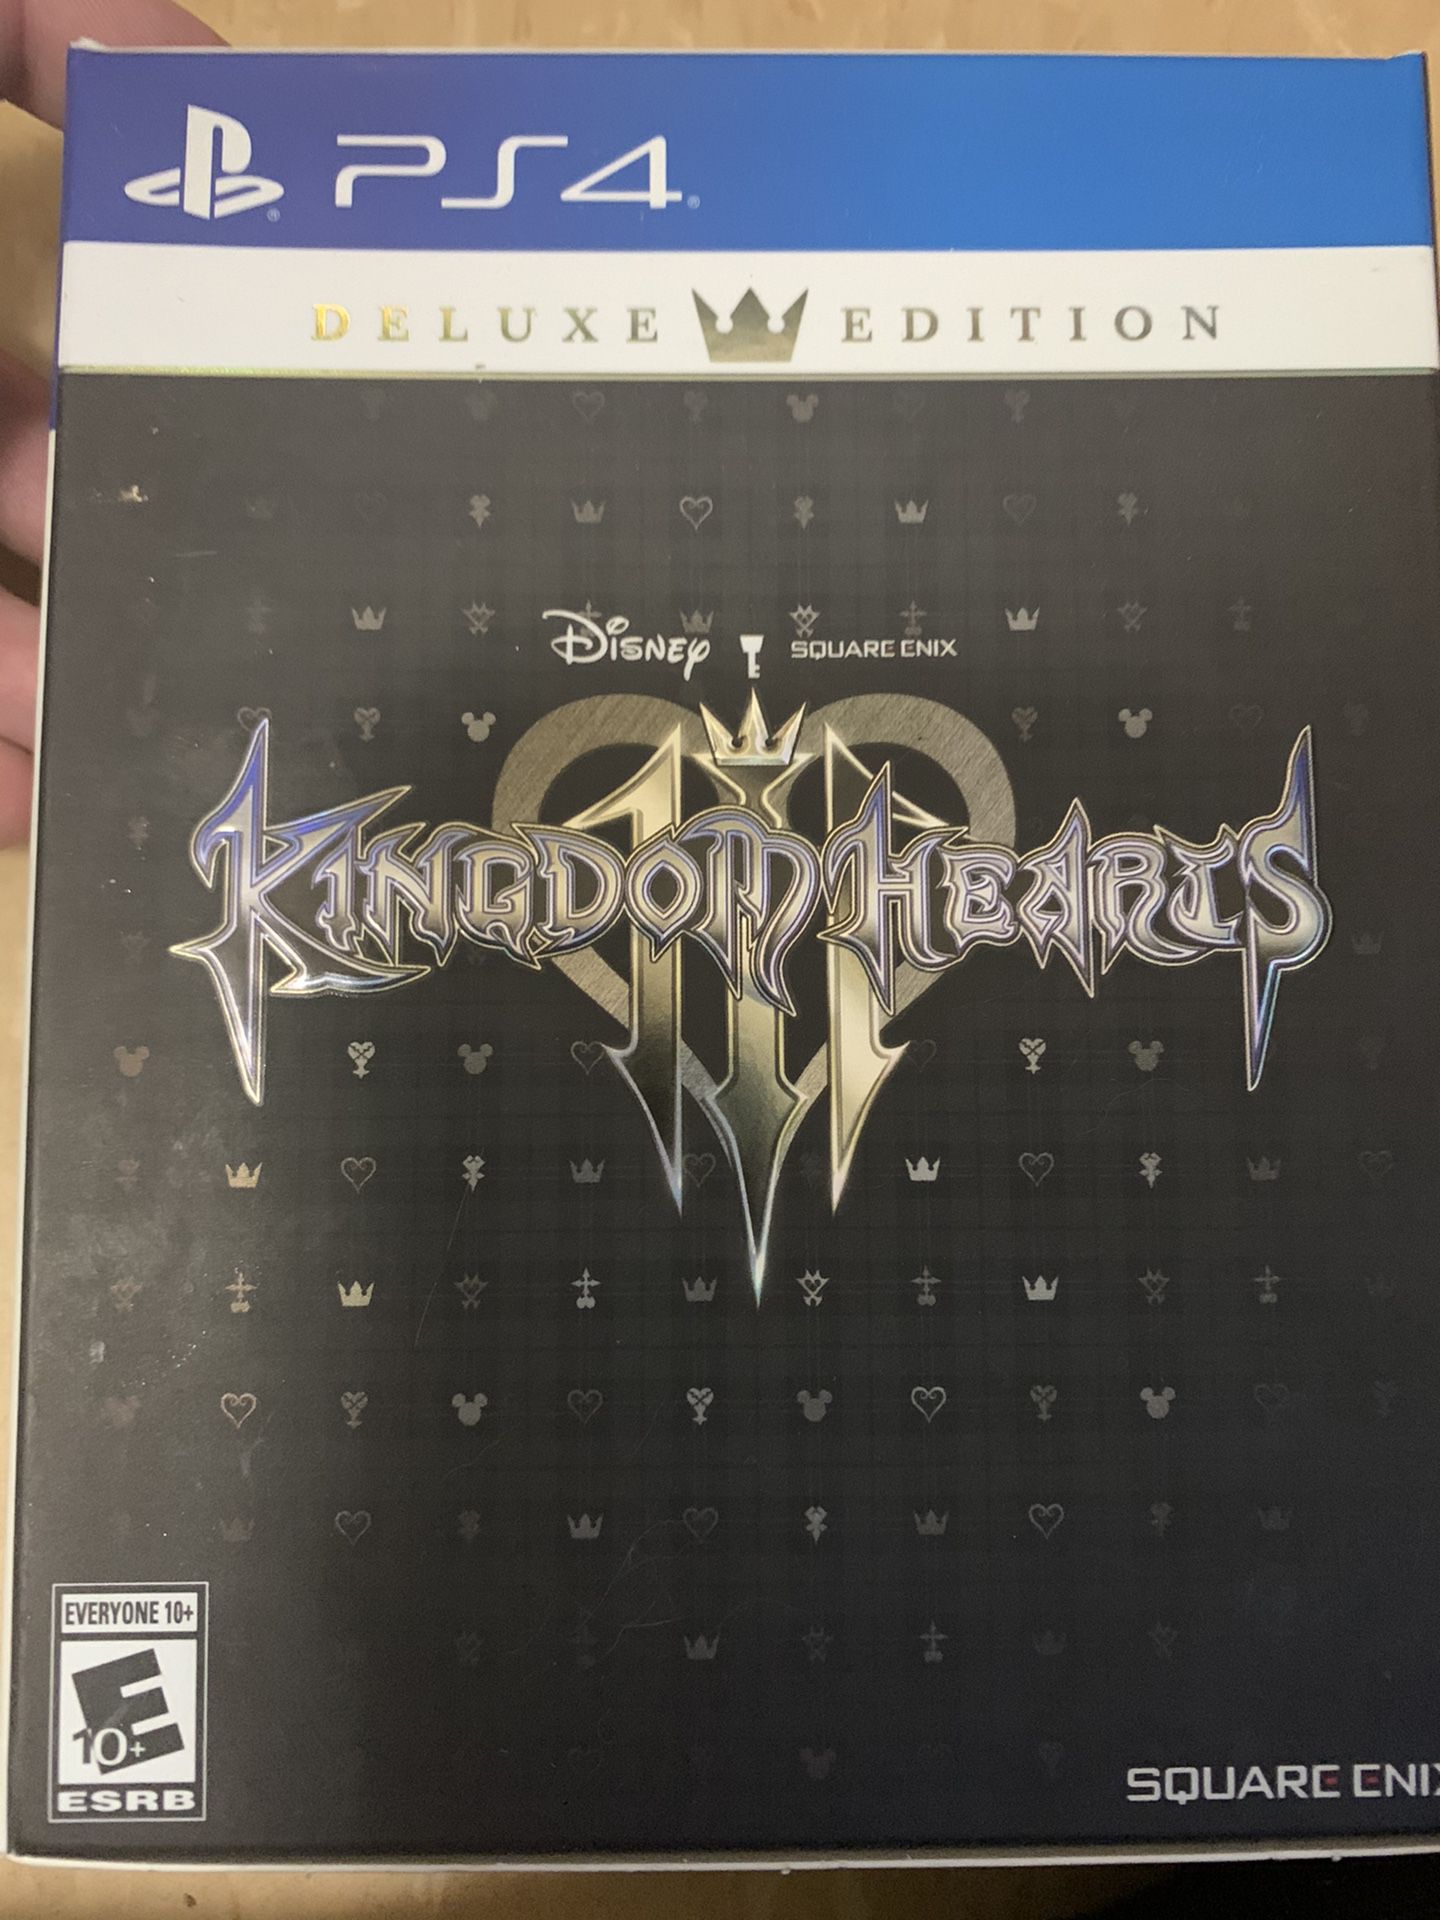 Kingdom Hearts 3 Deluxe Edition Extras (GAME NOT INCLUDED)